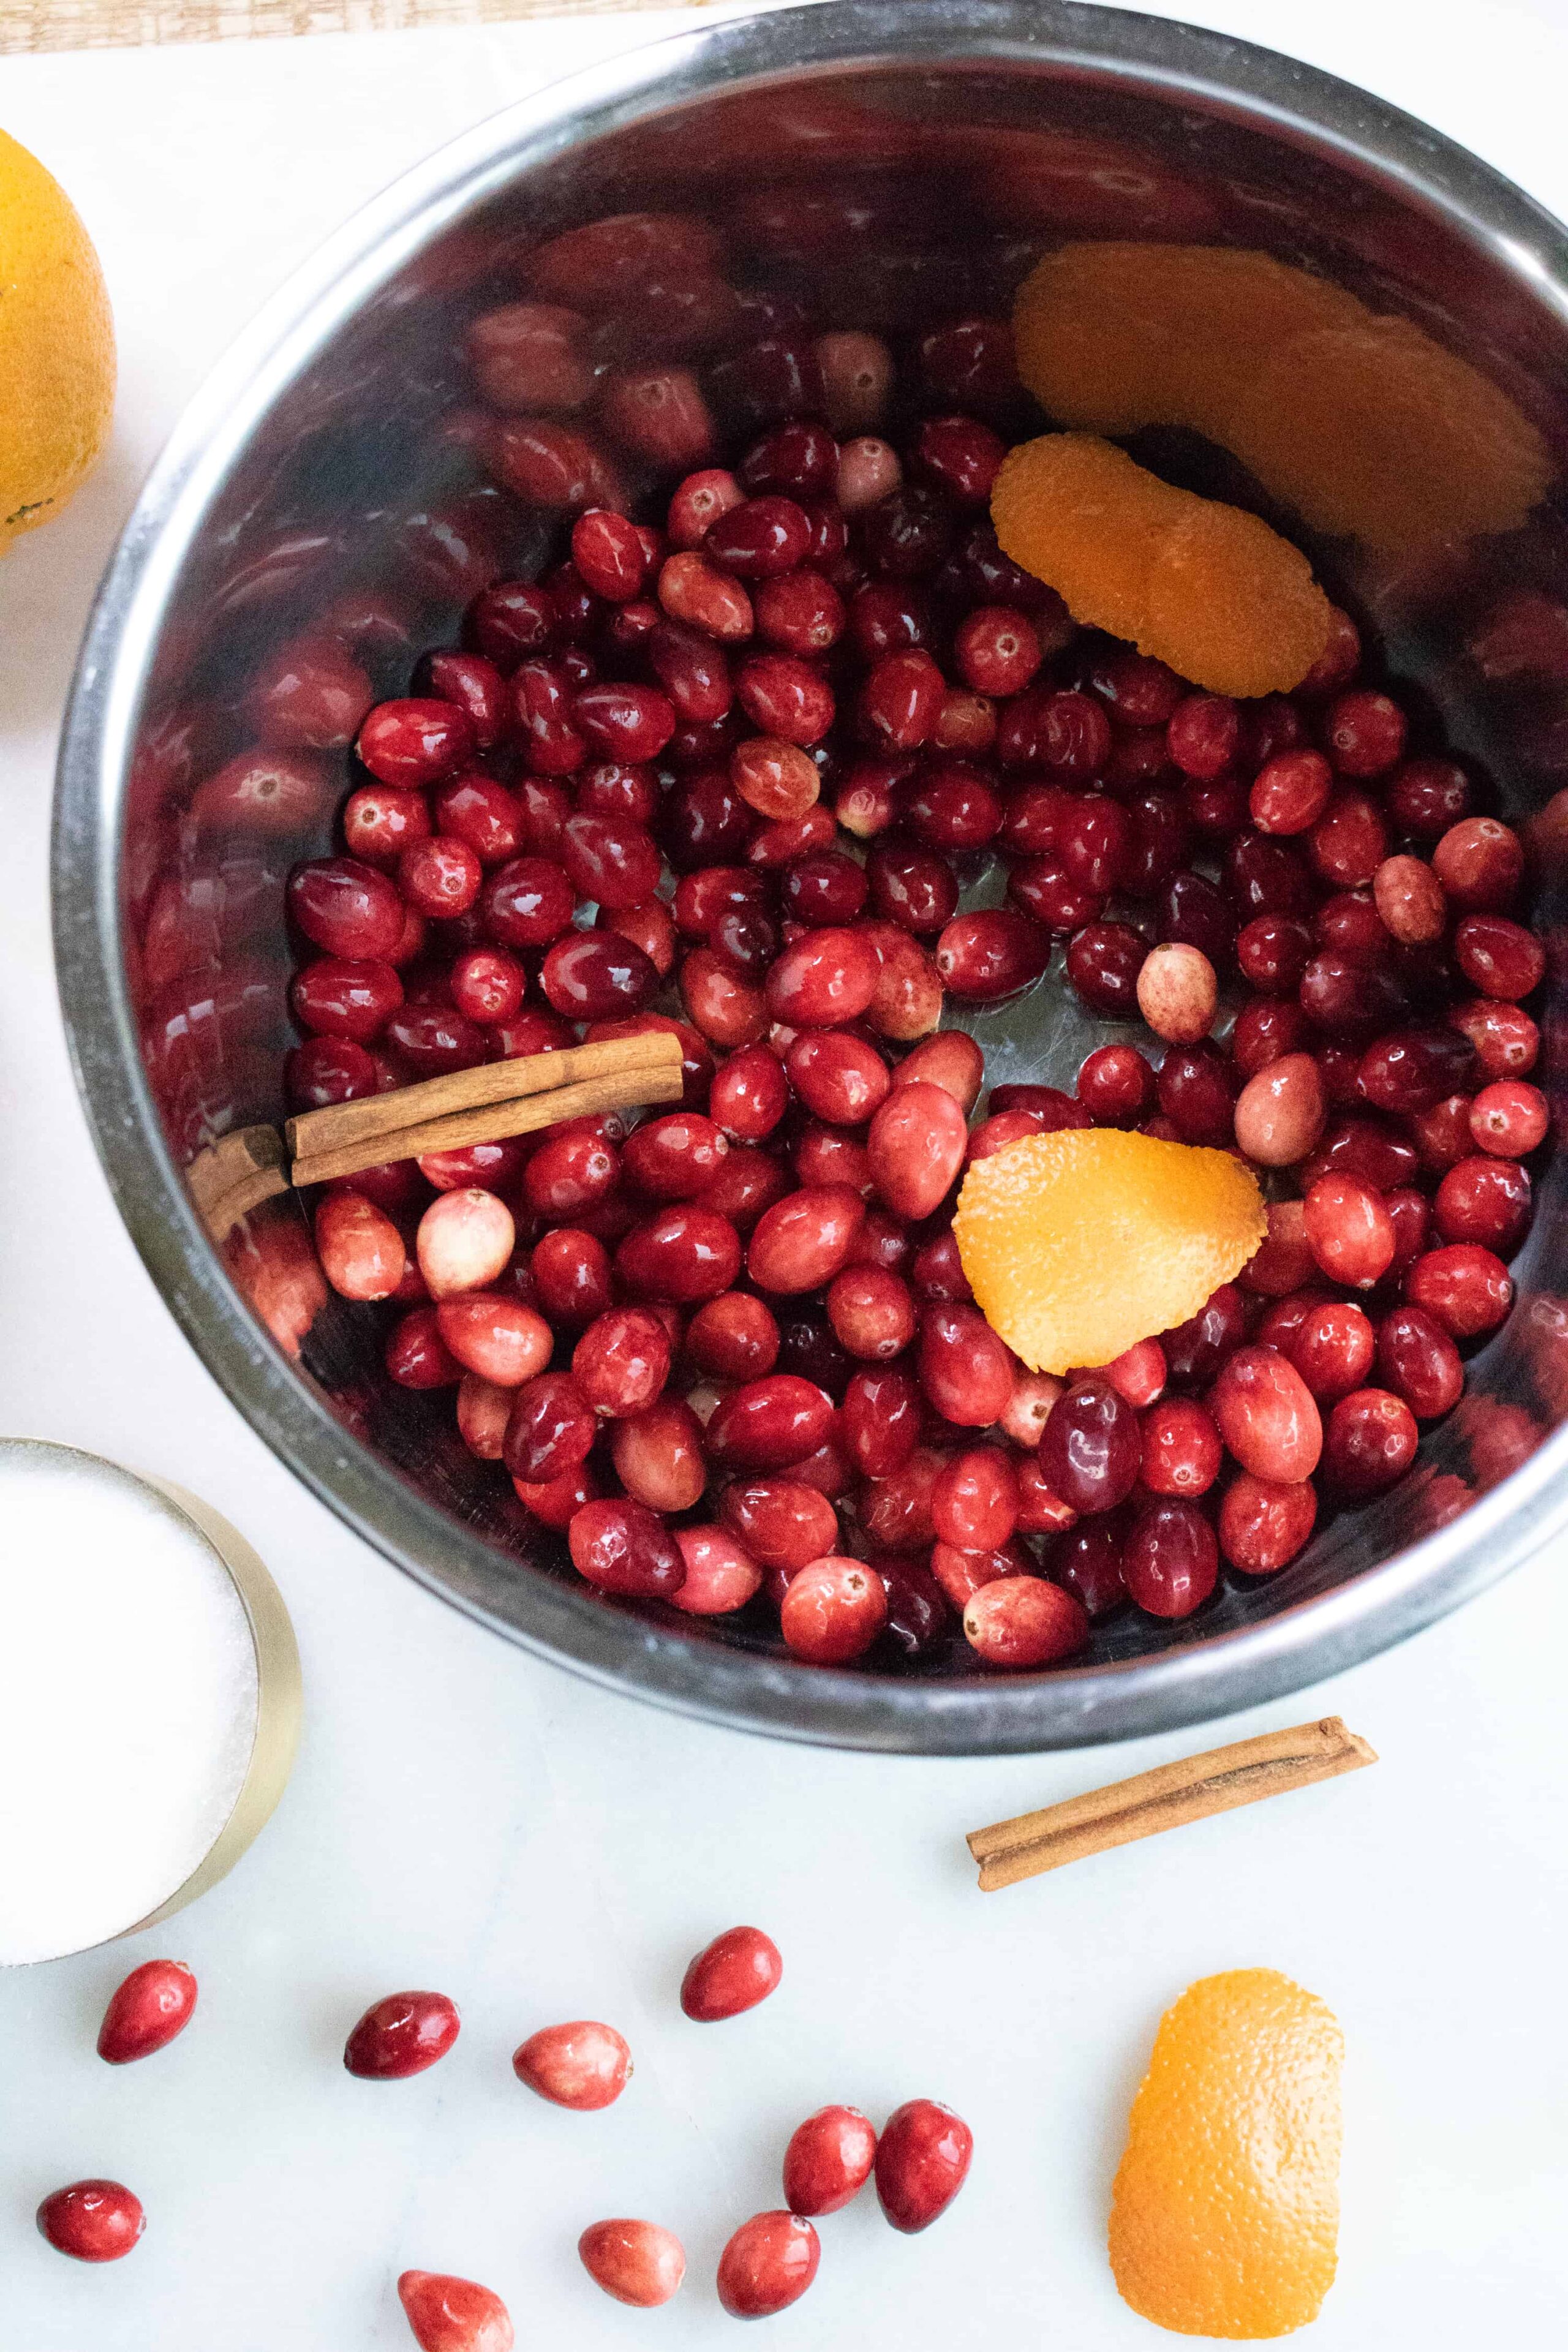 The ingredients for Instant Pot Cranberry Sauce being added to the Instant Pot inner pot